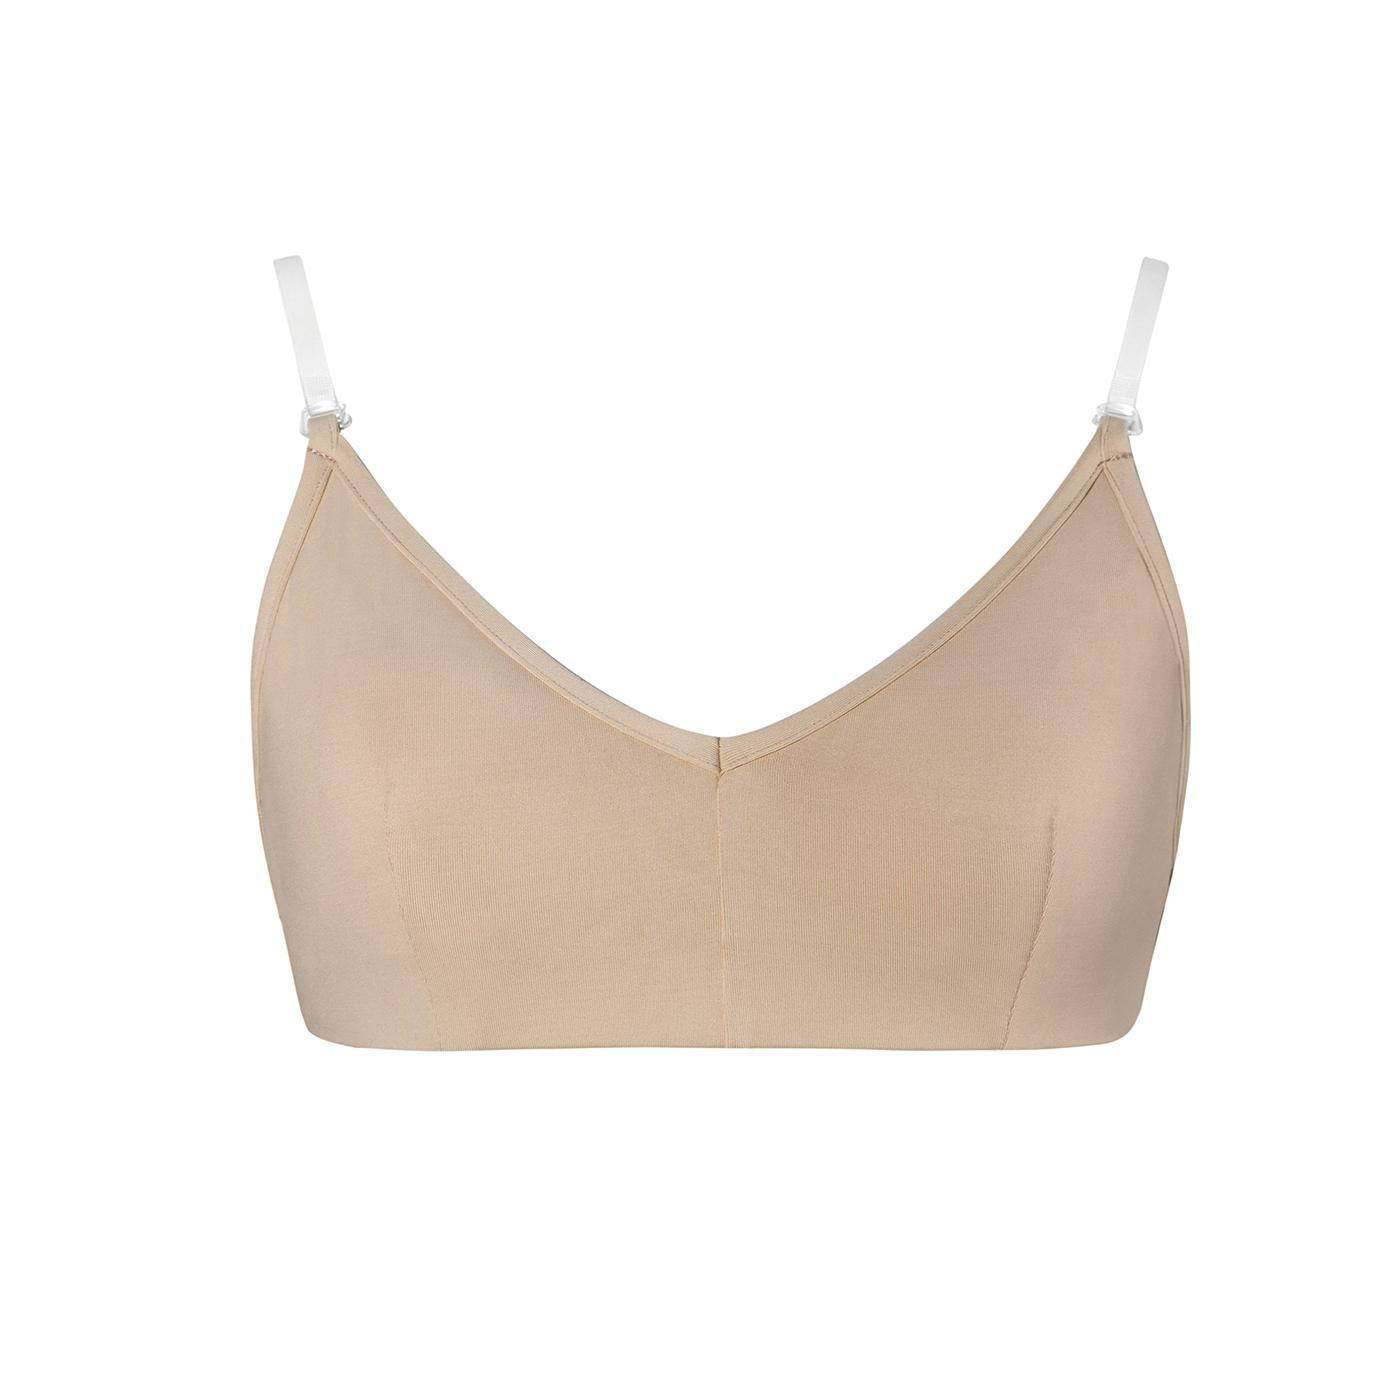 Energetiks Clear Strap Bra with Padding